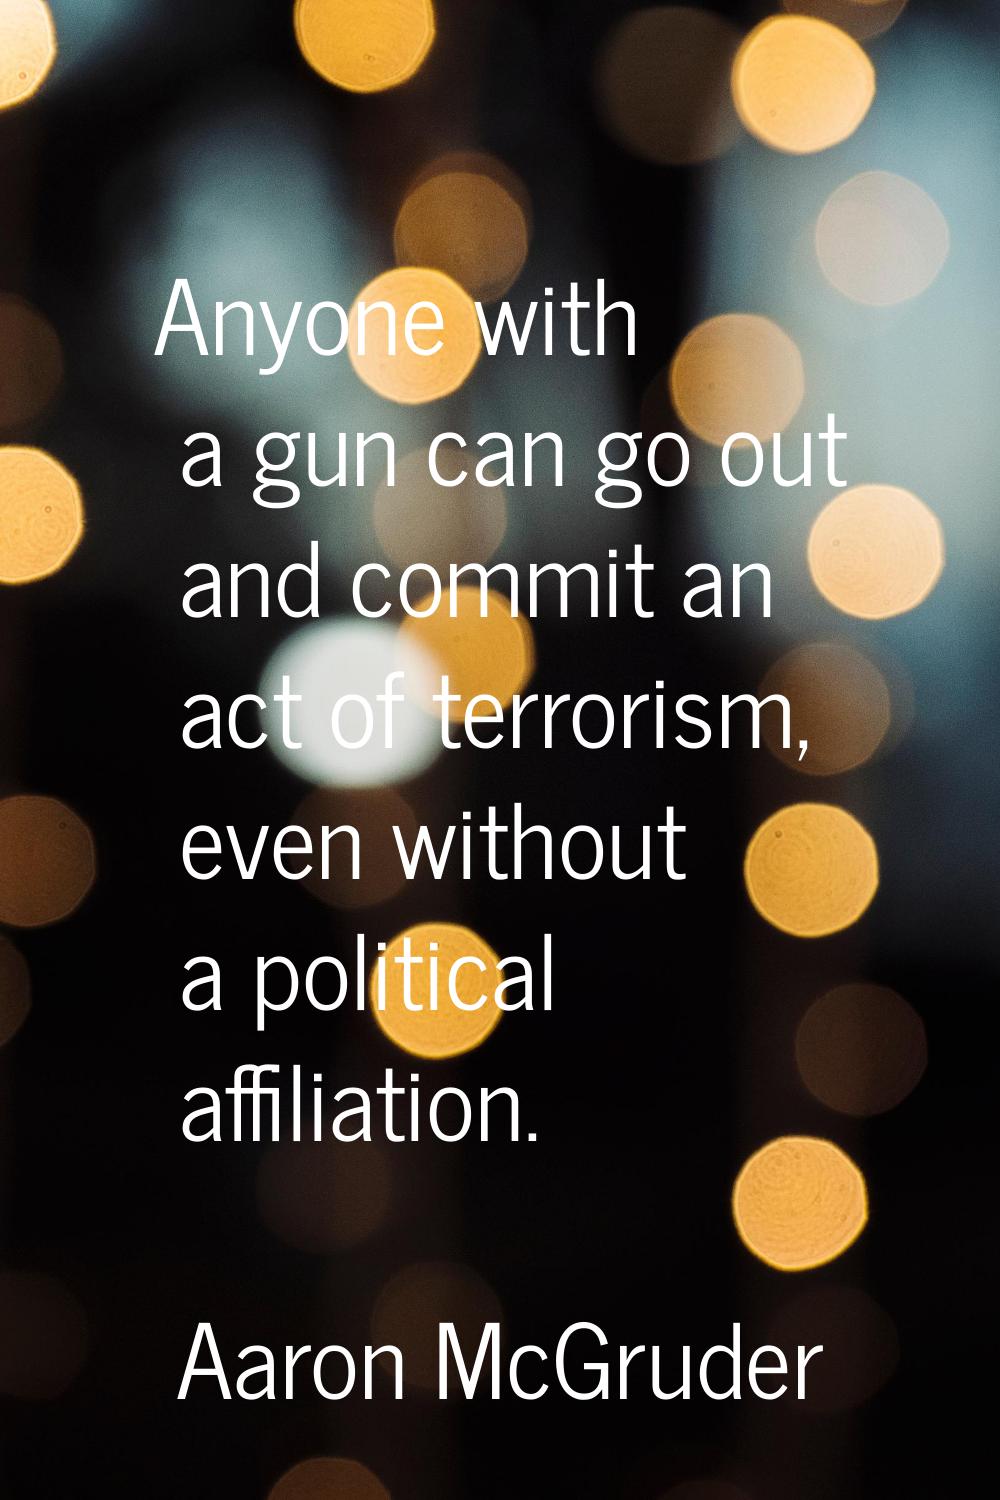 Anyone with a gun can go out and commit an act of terrorism, even without a political affiliation.